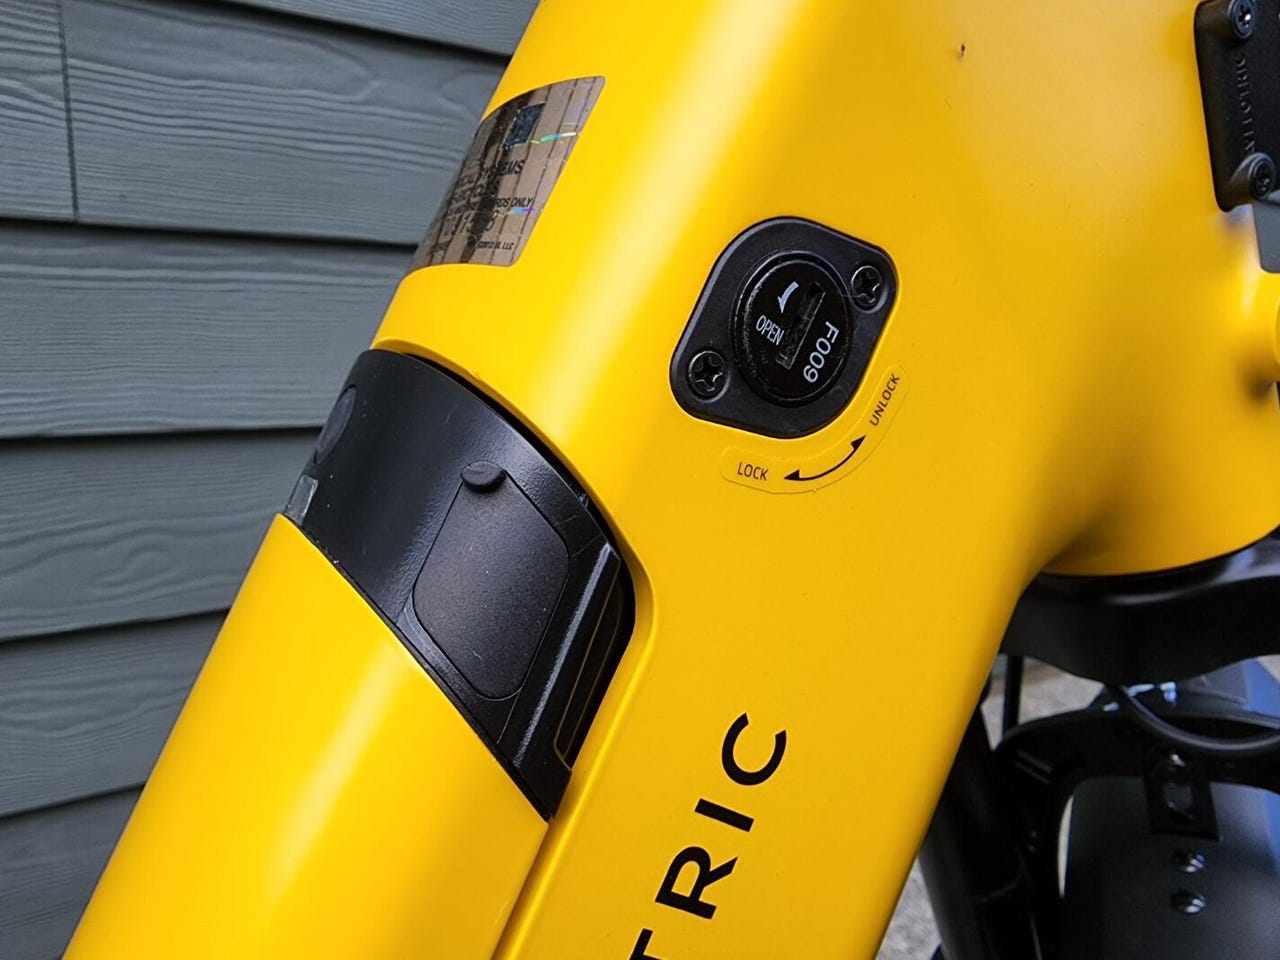 Velotric Discover 1 electric bike review: Accessibly built